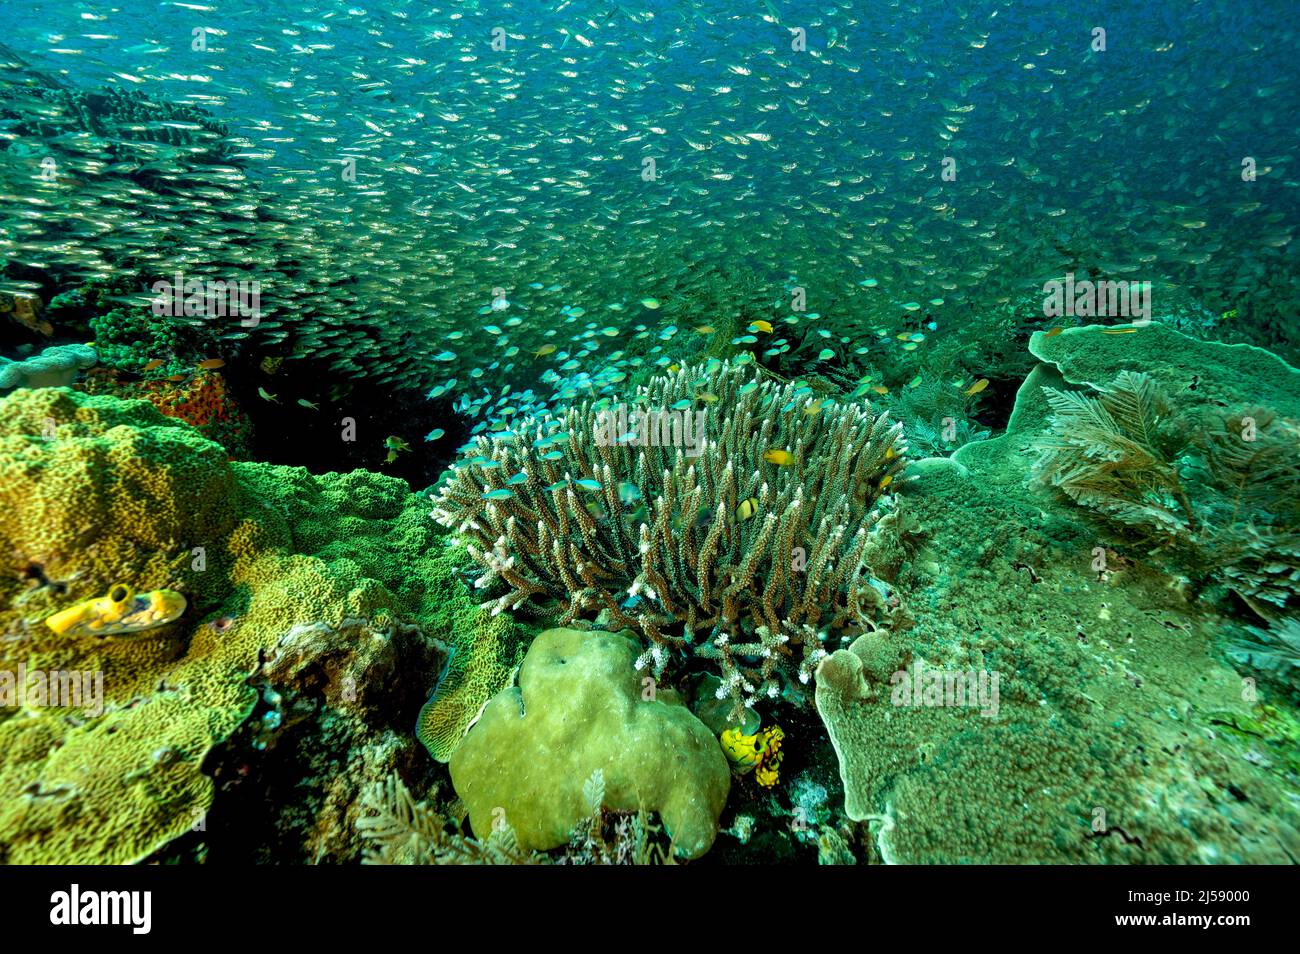 Reef scenic with glass fishes and blue damsels, Raja Ampat Indonesia. Stock Photo